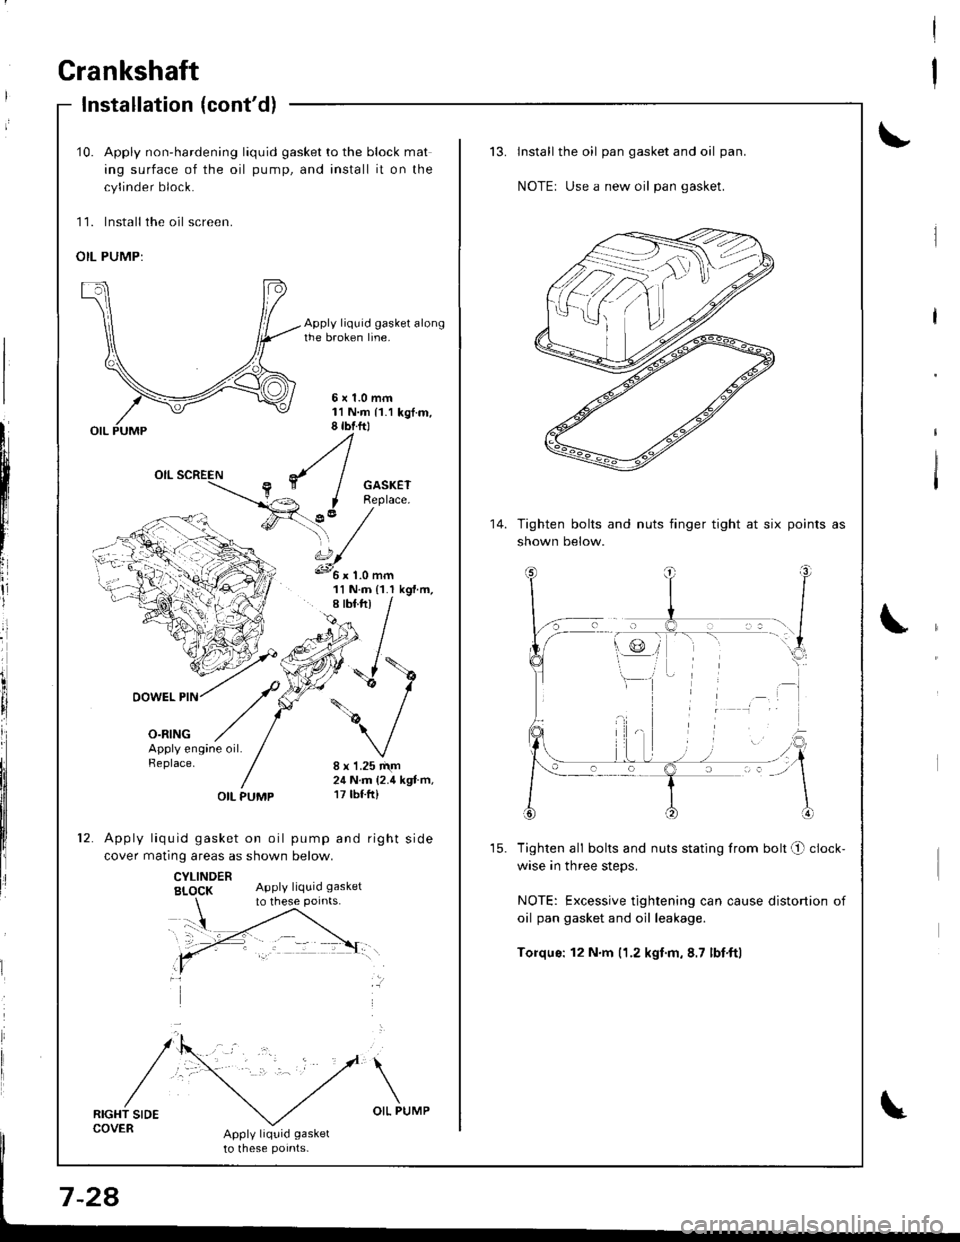 HONDA INTEGRA 1998 4.G Owners Manual Crankshaft
Installation (contd)
I
I
t
l;I
I
fi,
\
10. Apply non-hardening liquid gasket to the block mat
ing surface of the oil pump, and install it on the
cylinder block.
11. lnstall the oil screen.